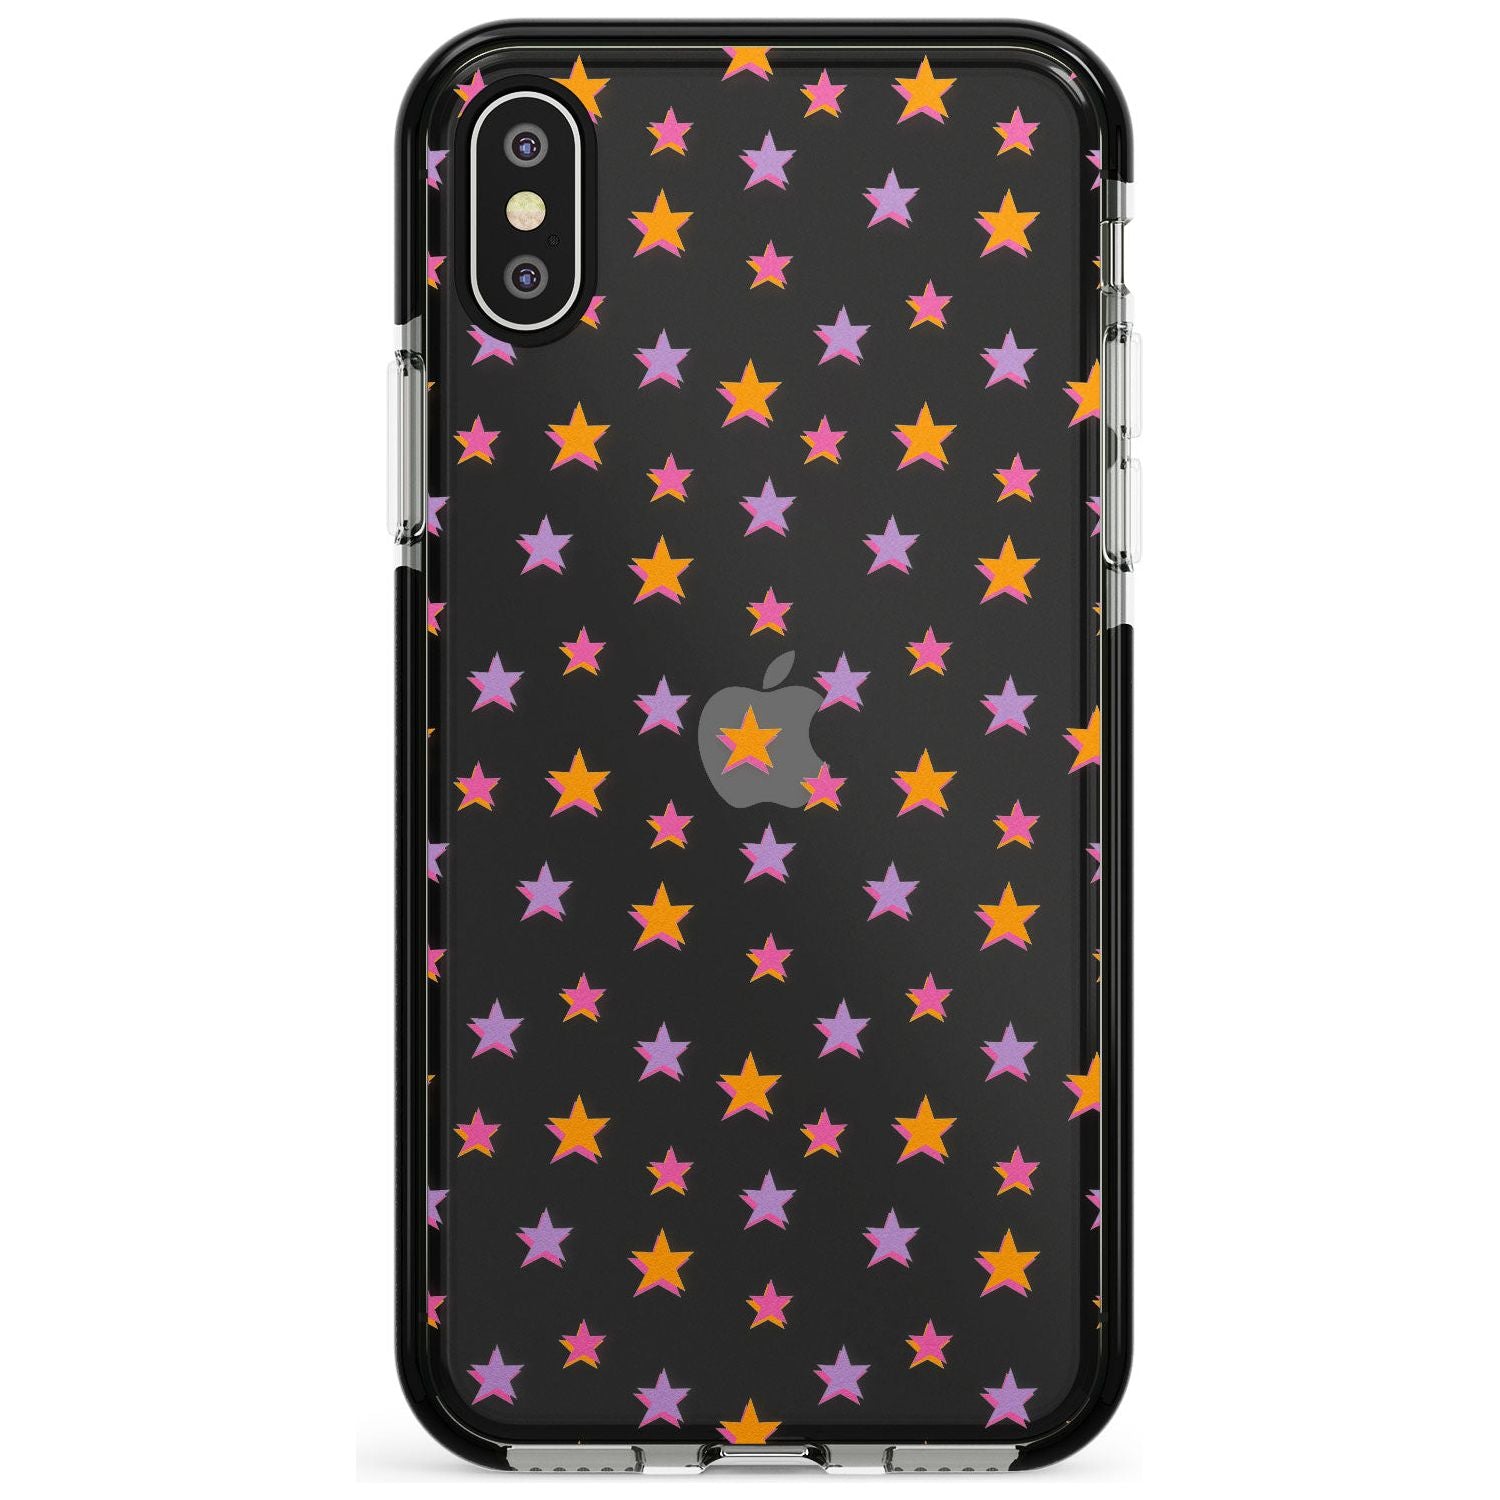 Spangling Stars Pattern Black Impact Phone Case for iPhone X XS Max XR